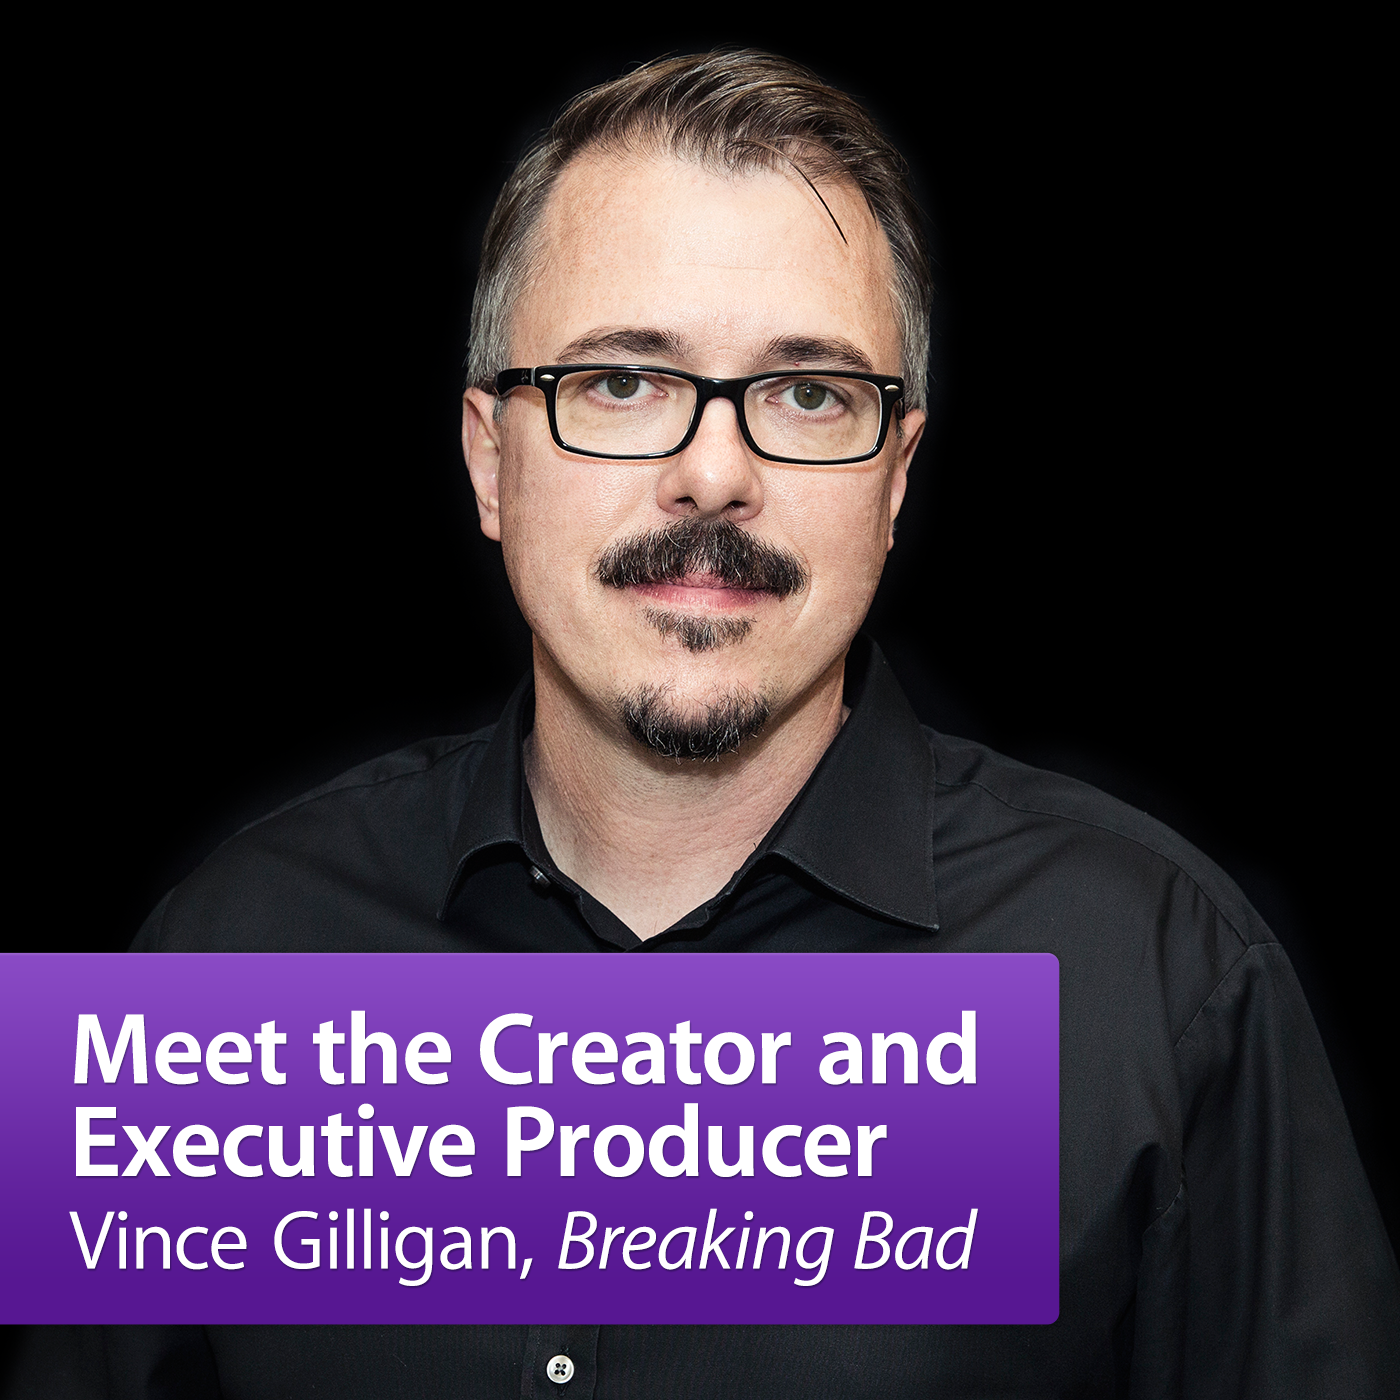 Vince Gilligan, "Breaking Bad": Meet the Creator and Executive Producer